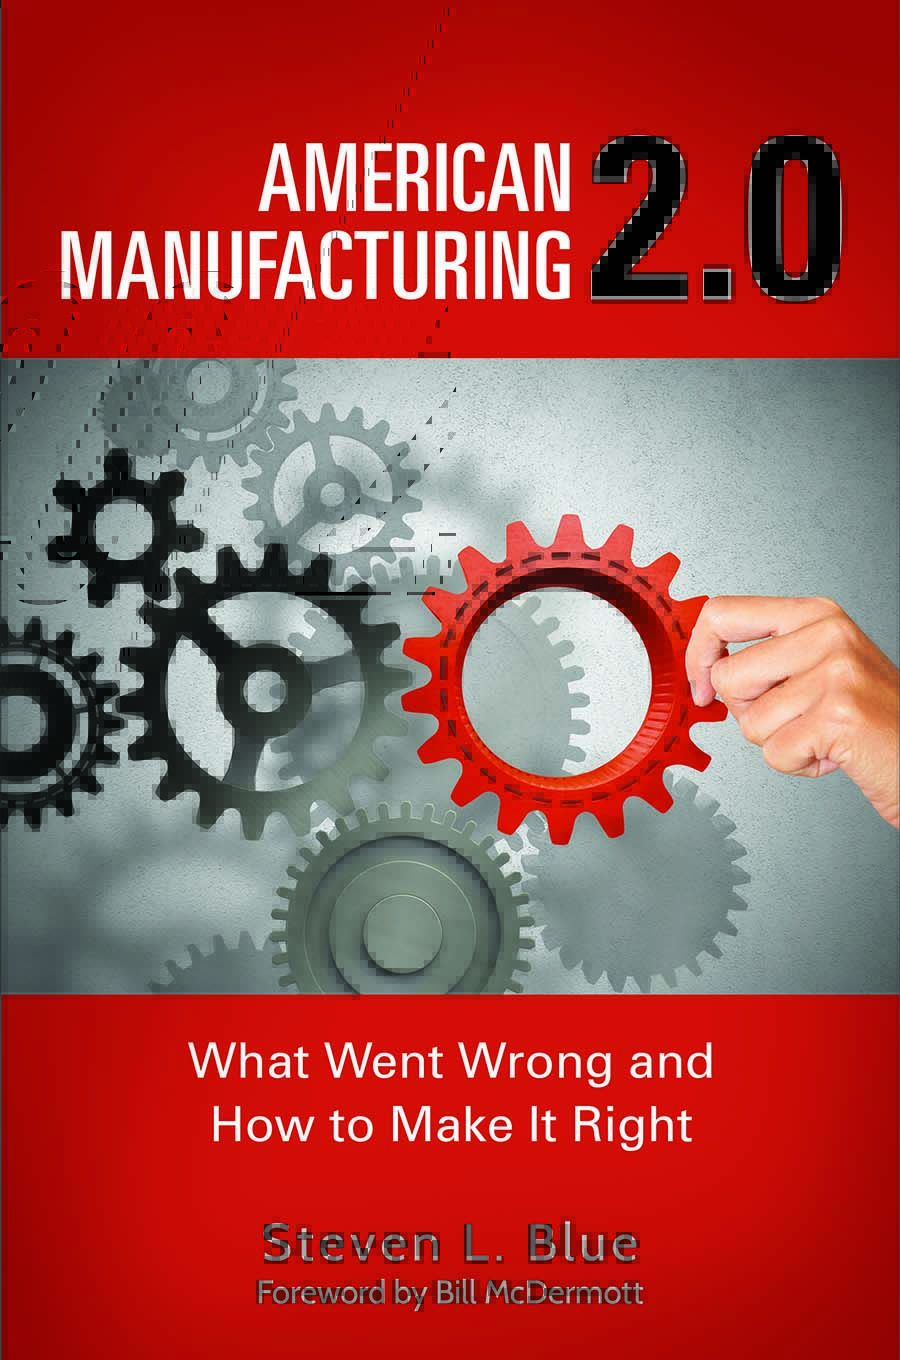 american-manufacturing-2-0-cover-lrw